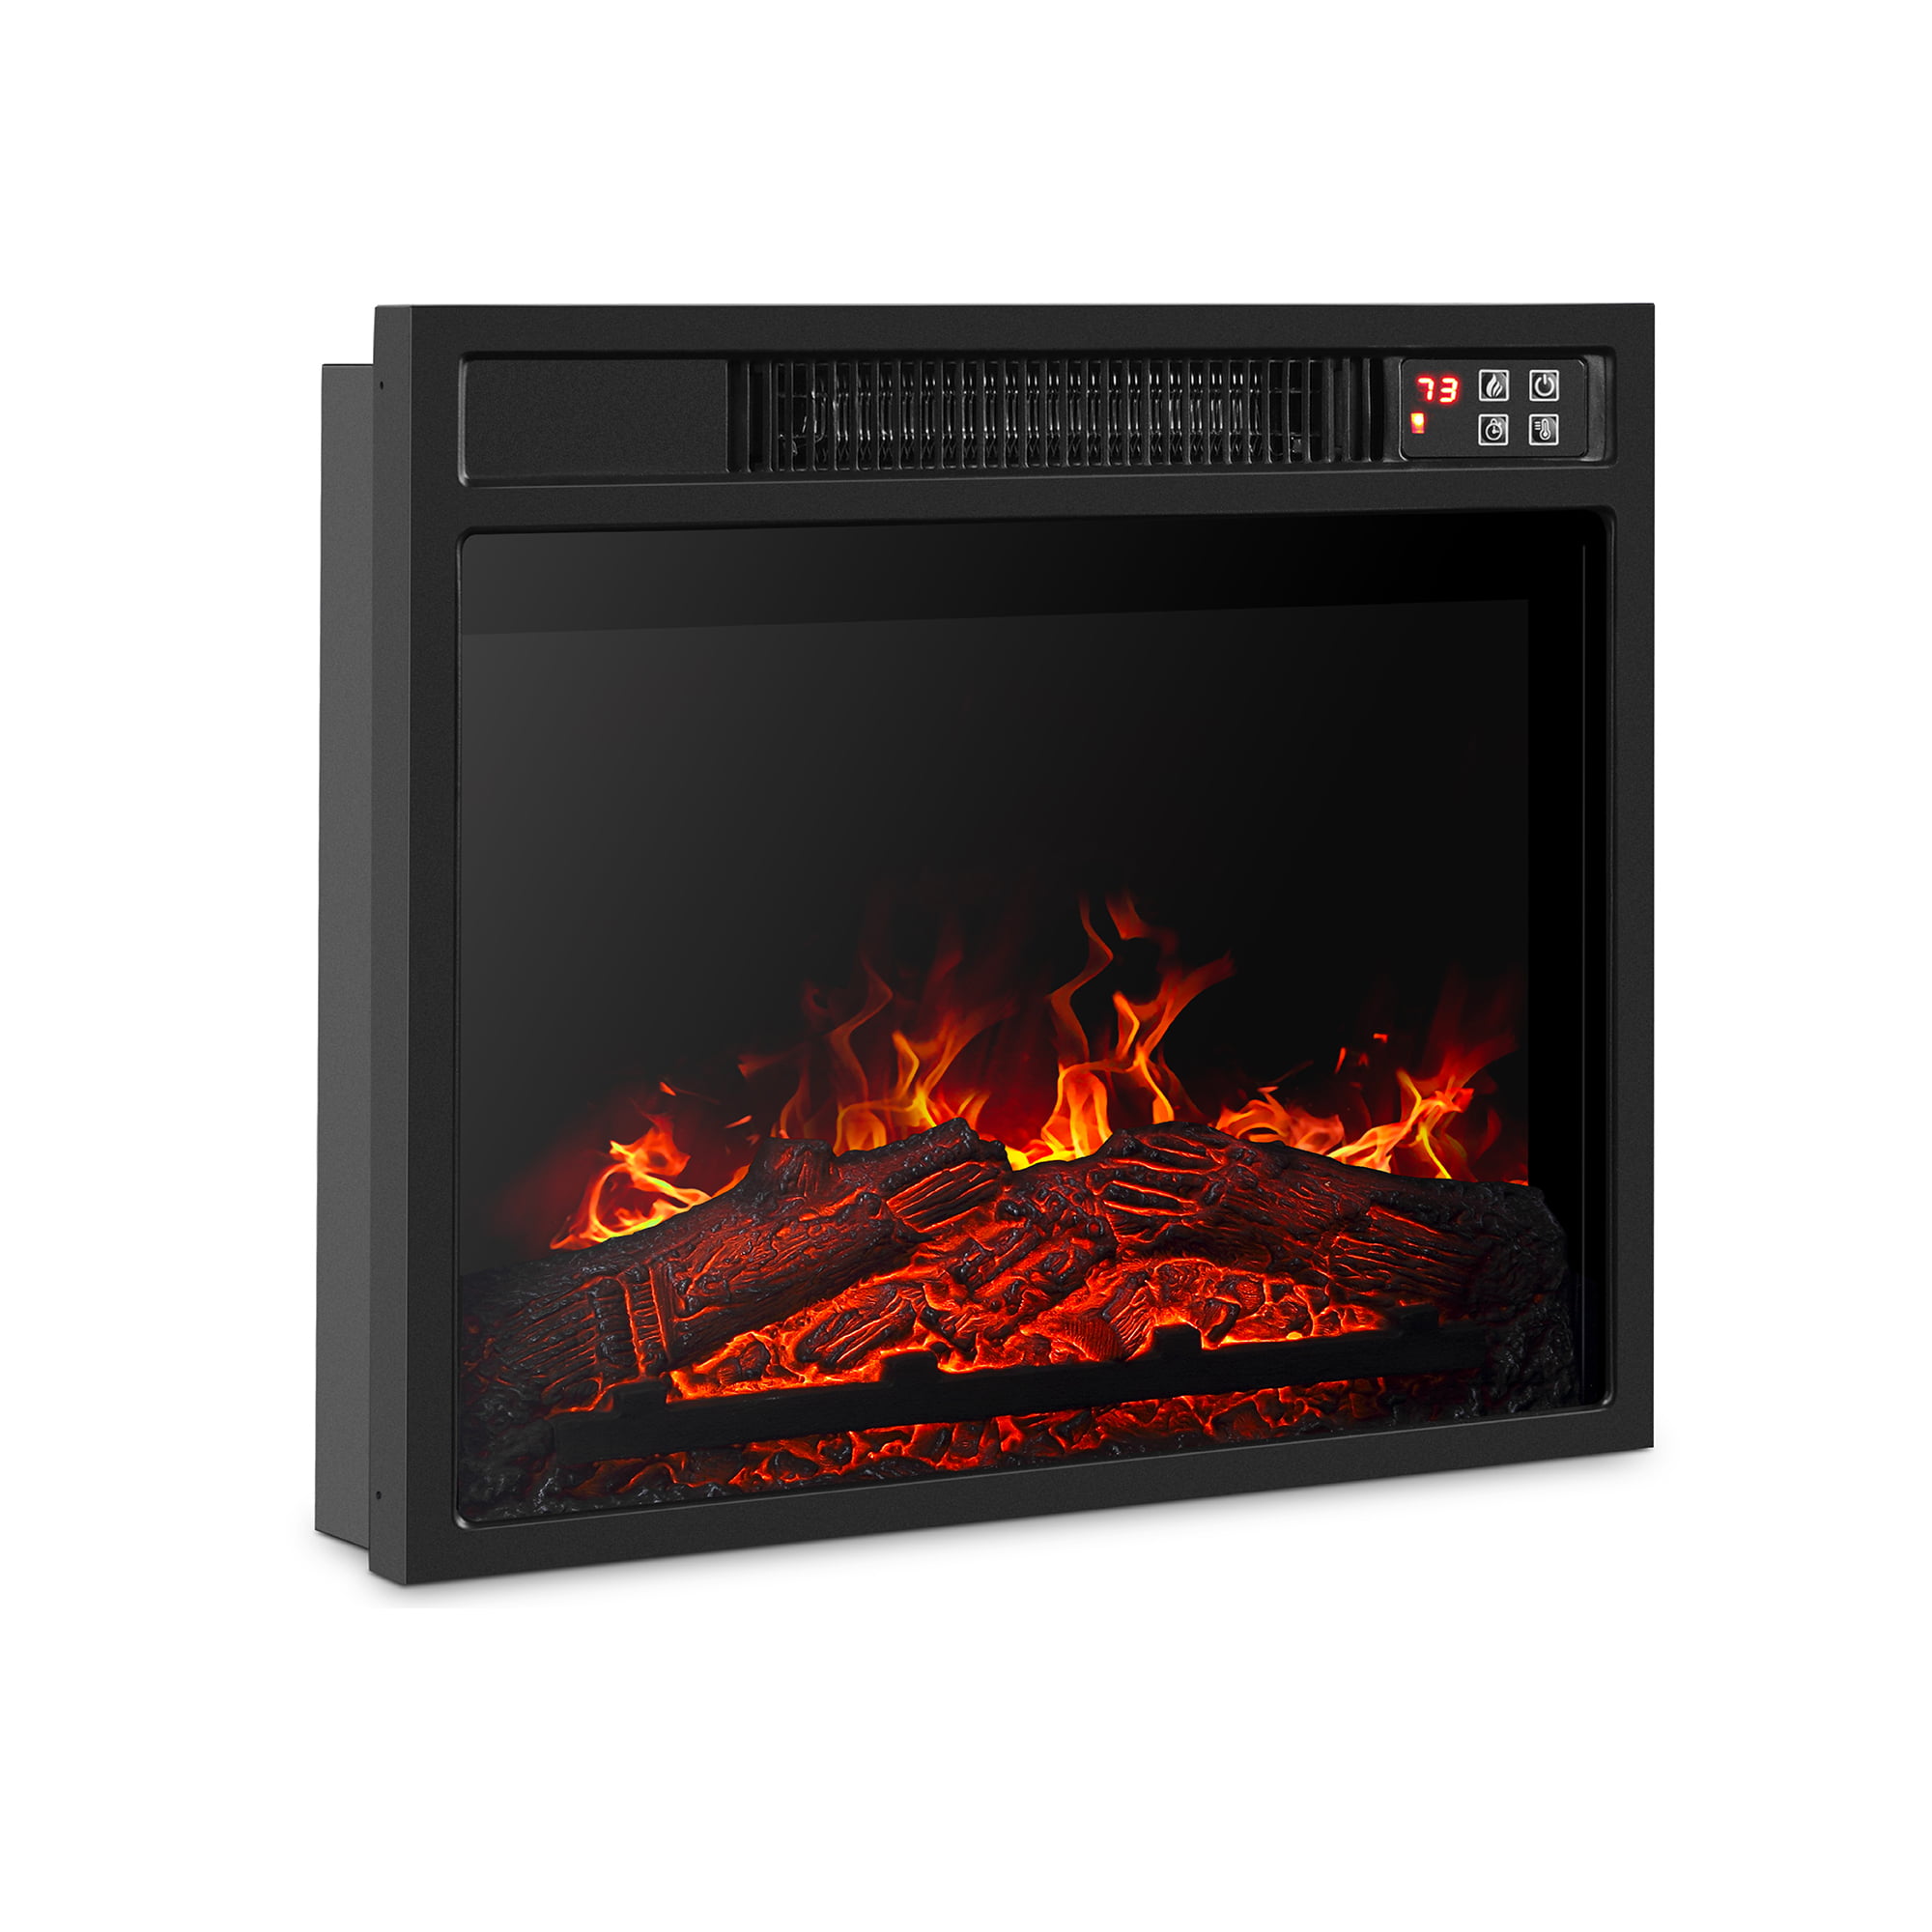 BELLEZE 18 Embedded Electric Fireplace Insert Remote Heater Glass View Adjustable Log Flame 1400W Black